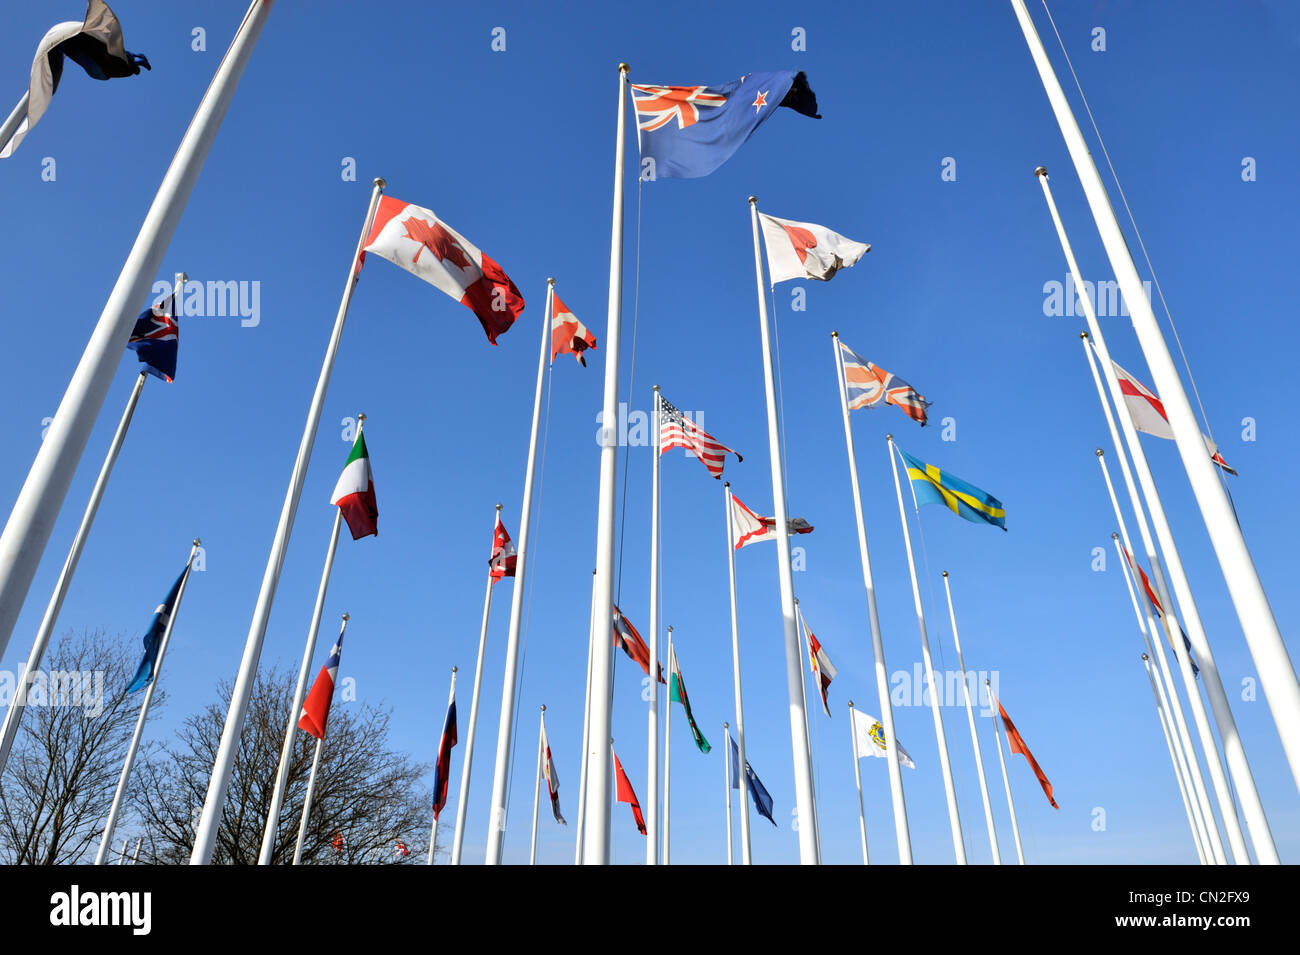 World flags flying Stock Photo